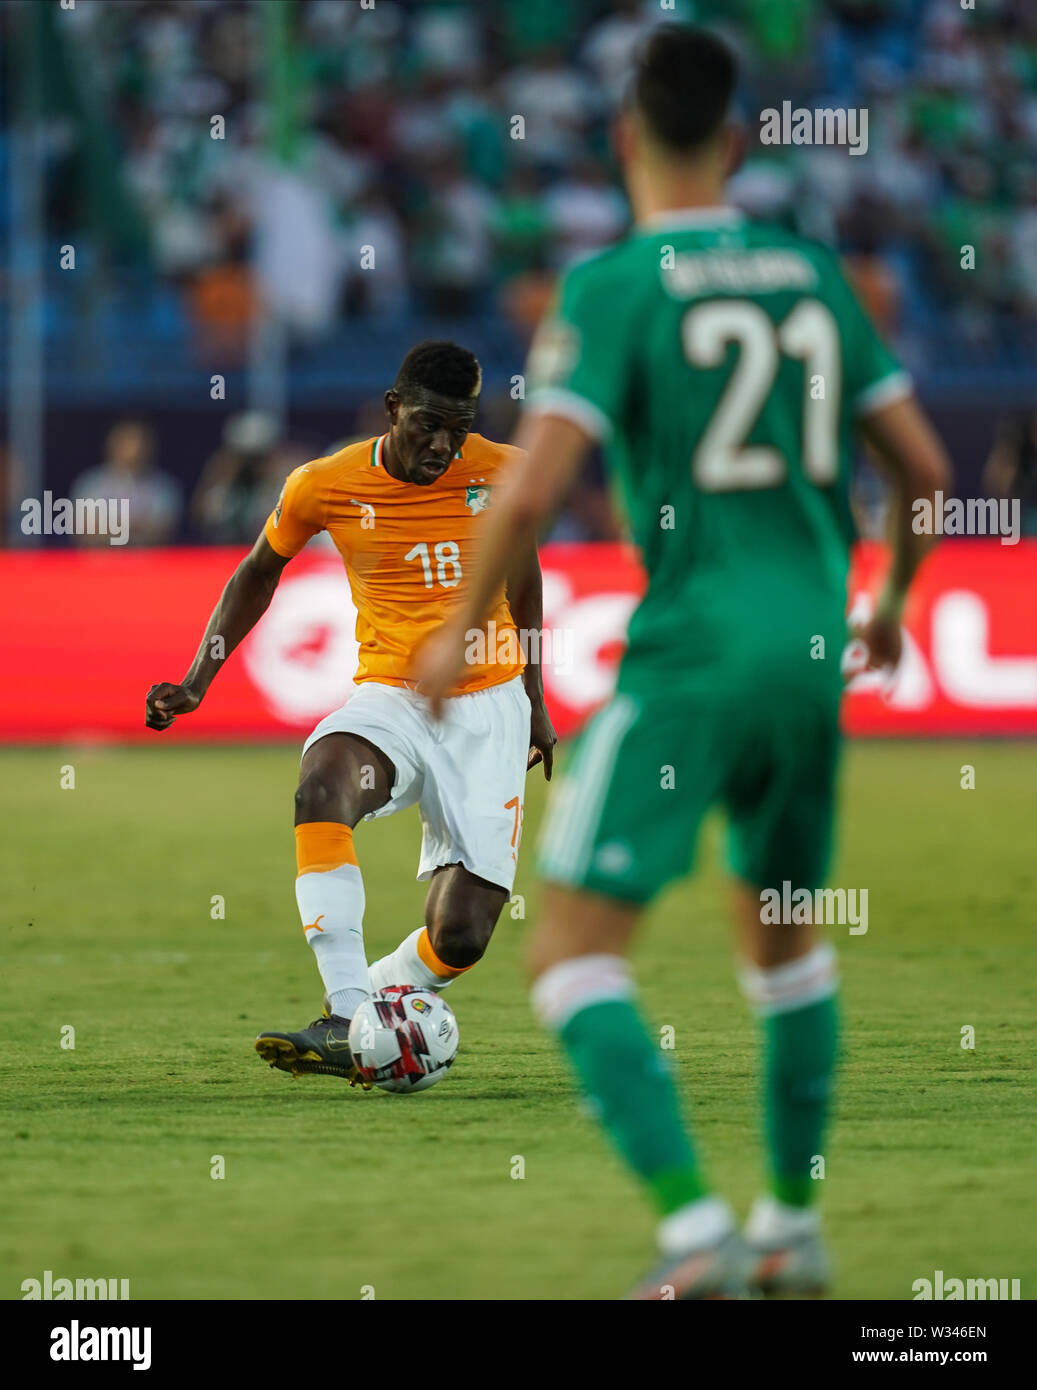 Suez, Egypt. 11th July, 2019. Ivory coast, Egypt - FRANCE OUT July 11, 2019: Ibrahim Sangare of Cote D'ivoire during the 2019 African Cup of Nations match between Ivory coast and Algeria at the Suez Stadium in Suez, Egypt. Ulrik Pedersen/CSM/Alamy Live News Stock Photo